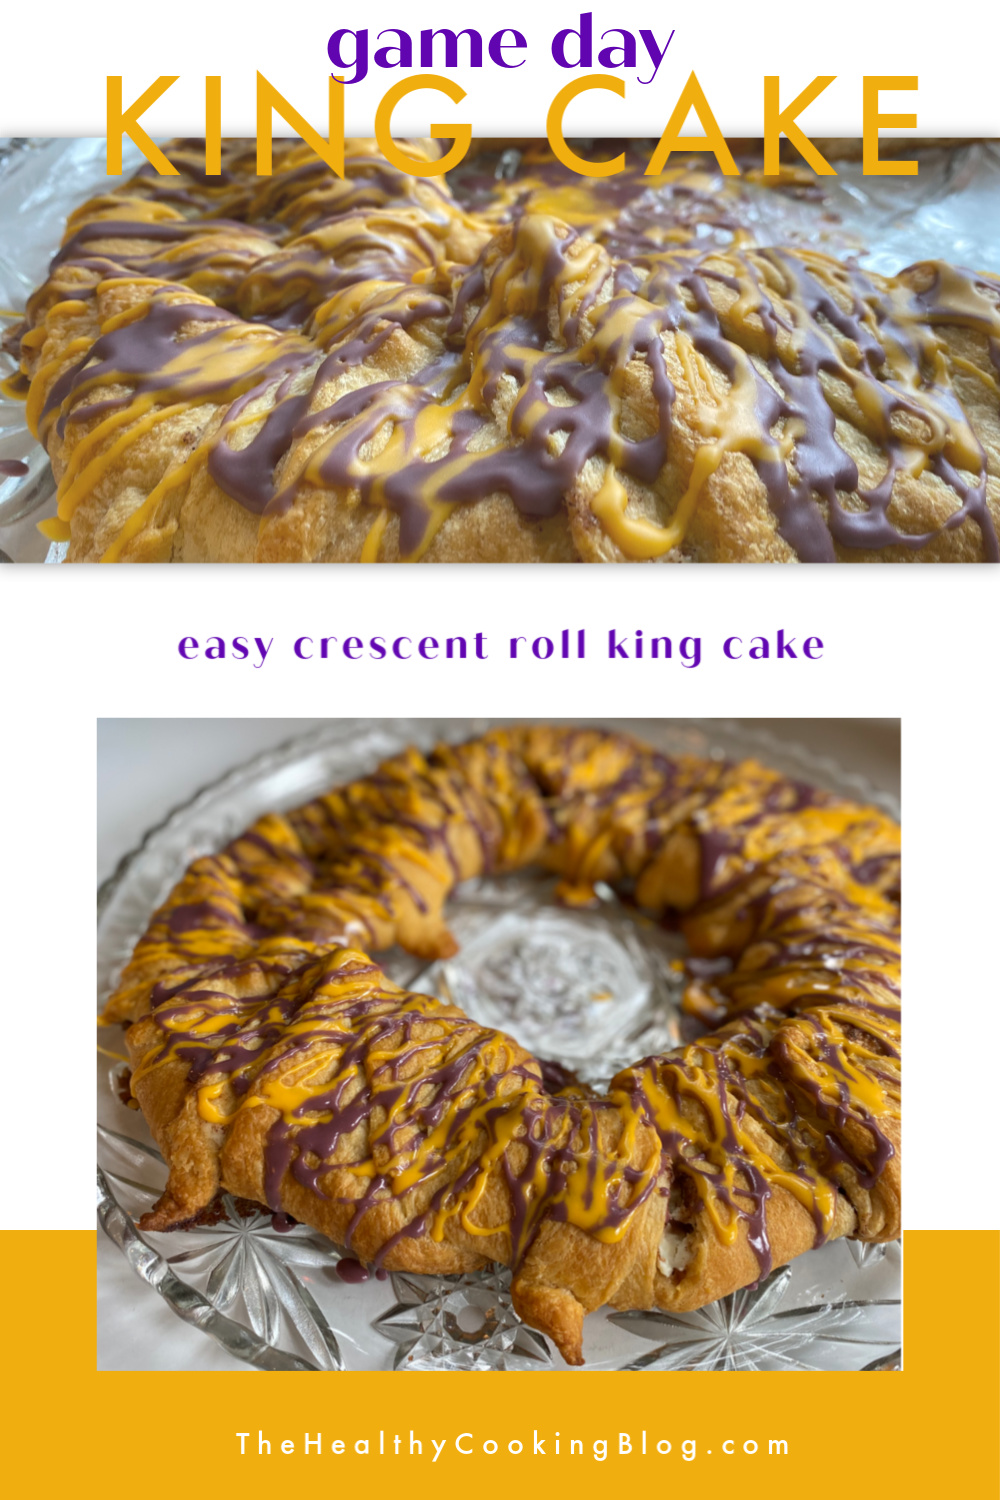 How To Make King Cake Recipe with Crescent Rolls - Easy King Cake